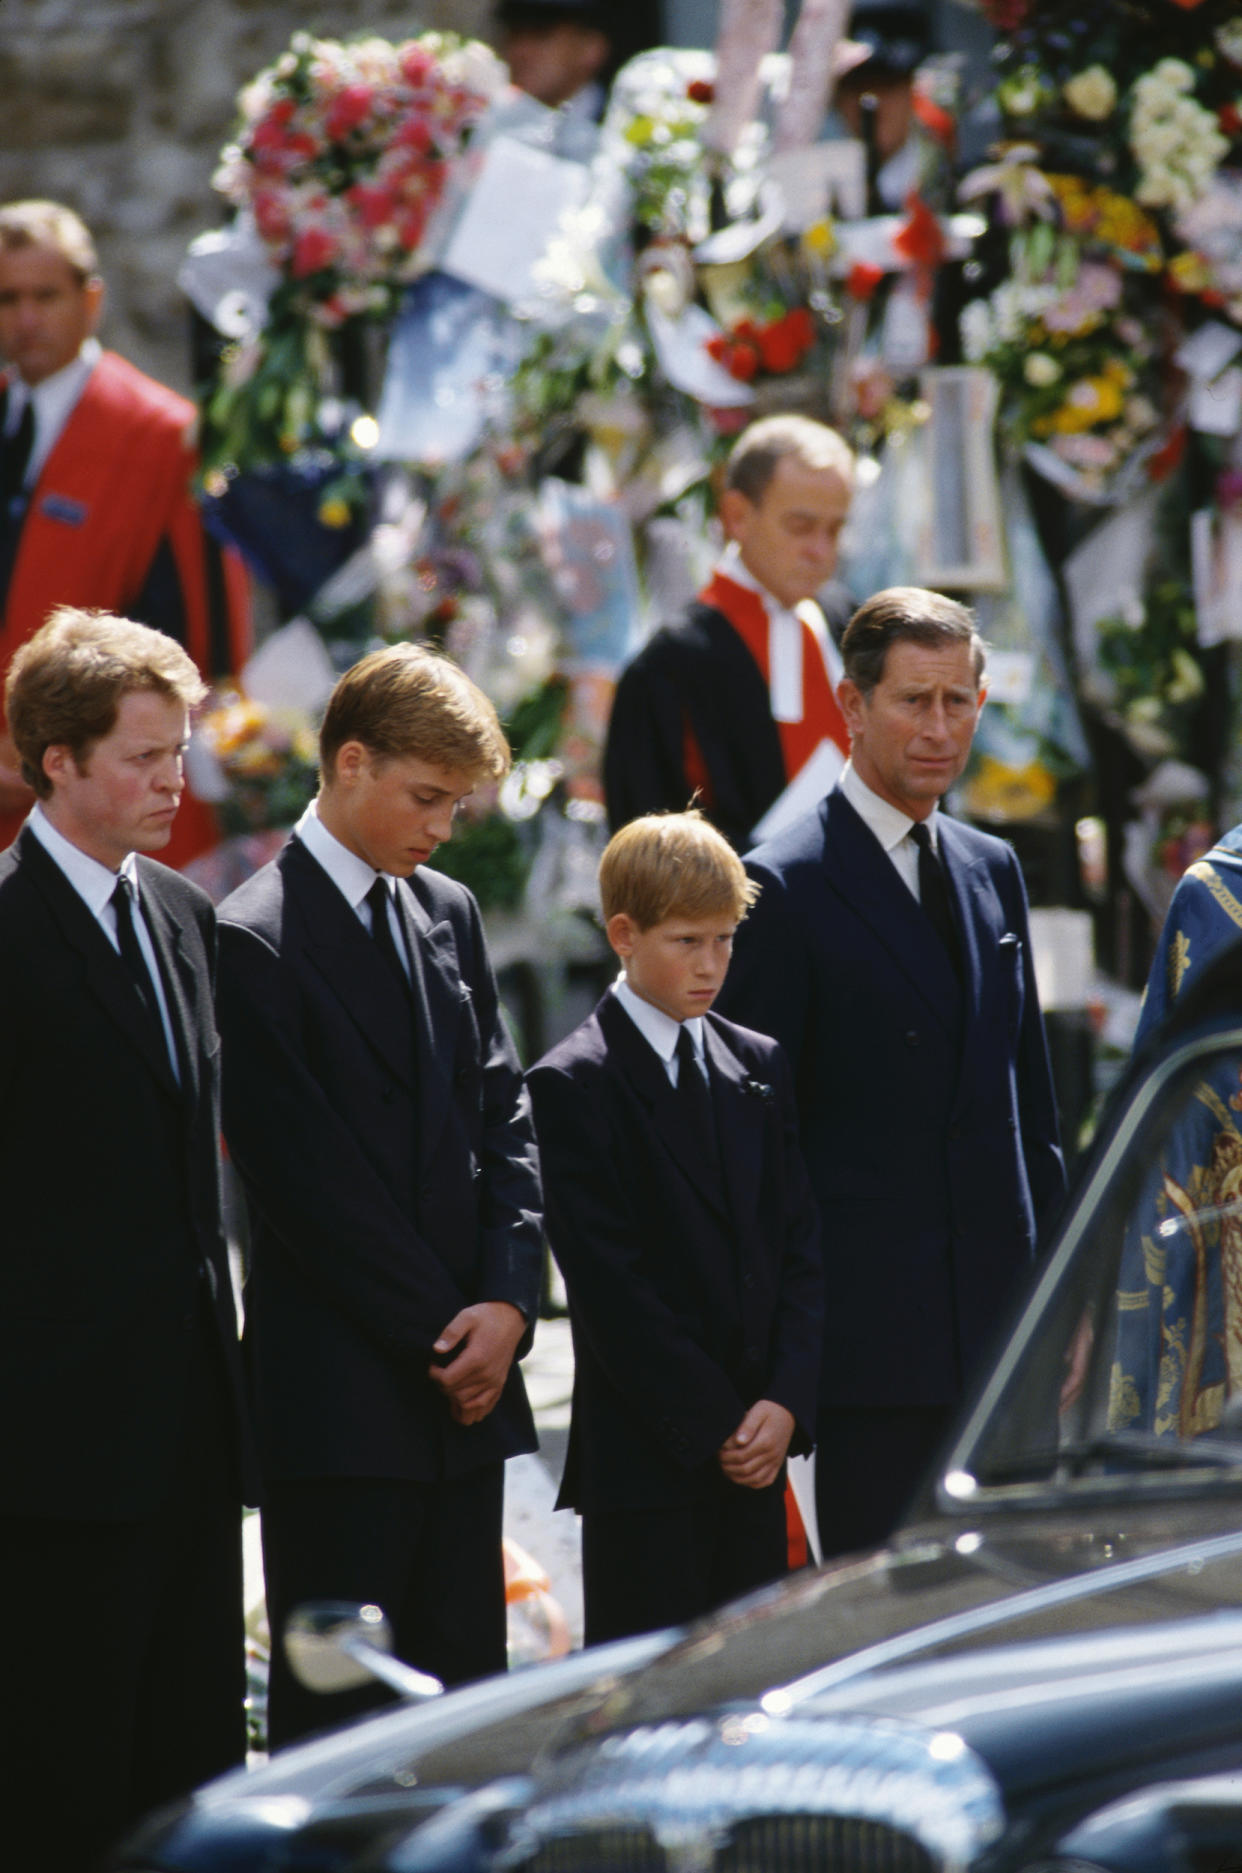 Royal Family at Princess Diana's Funeral (Peter Turnley / Corbis / VCG via Getty Images)